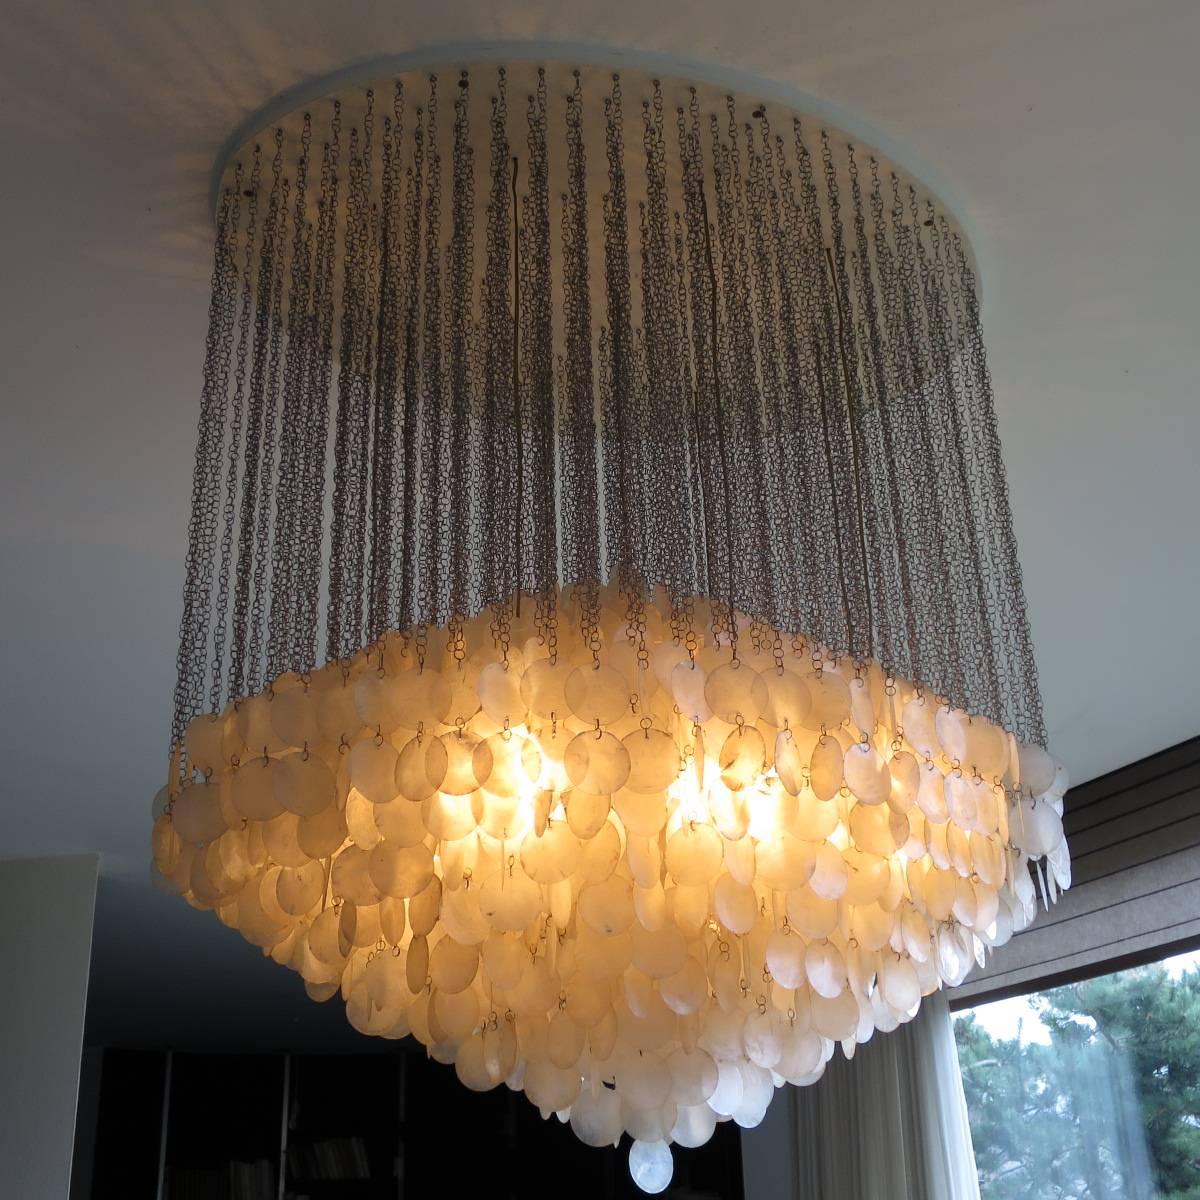 An original Fun 7DM chandelier by Verner Panton hanging lamp, two cluster Manufacturer, J. Luber Ag Switzerland Materials: Small discs of shell, metal 1964.